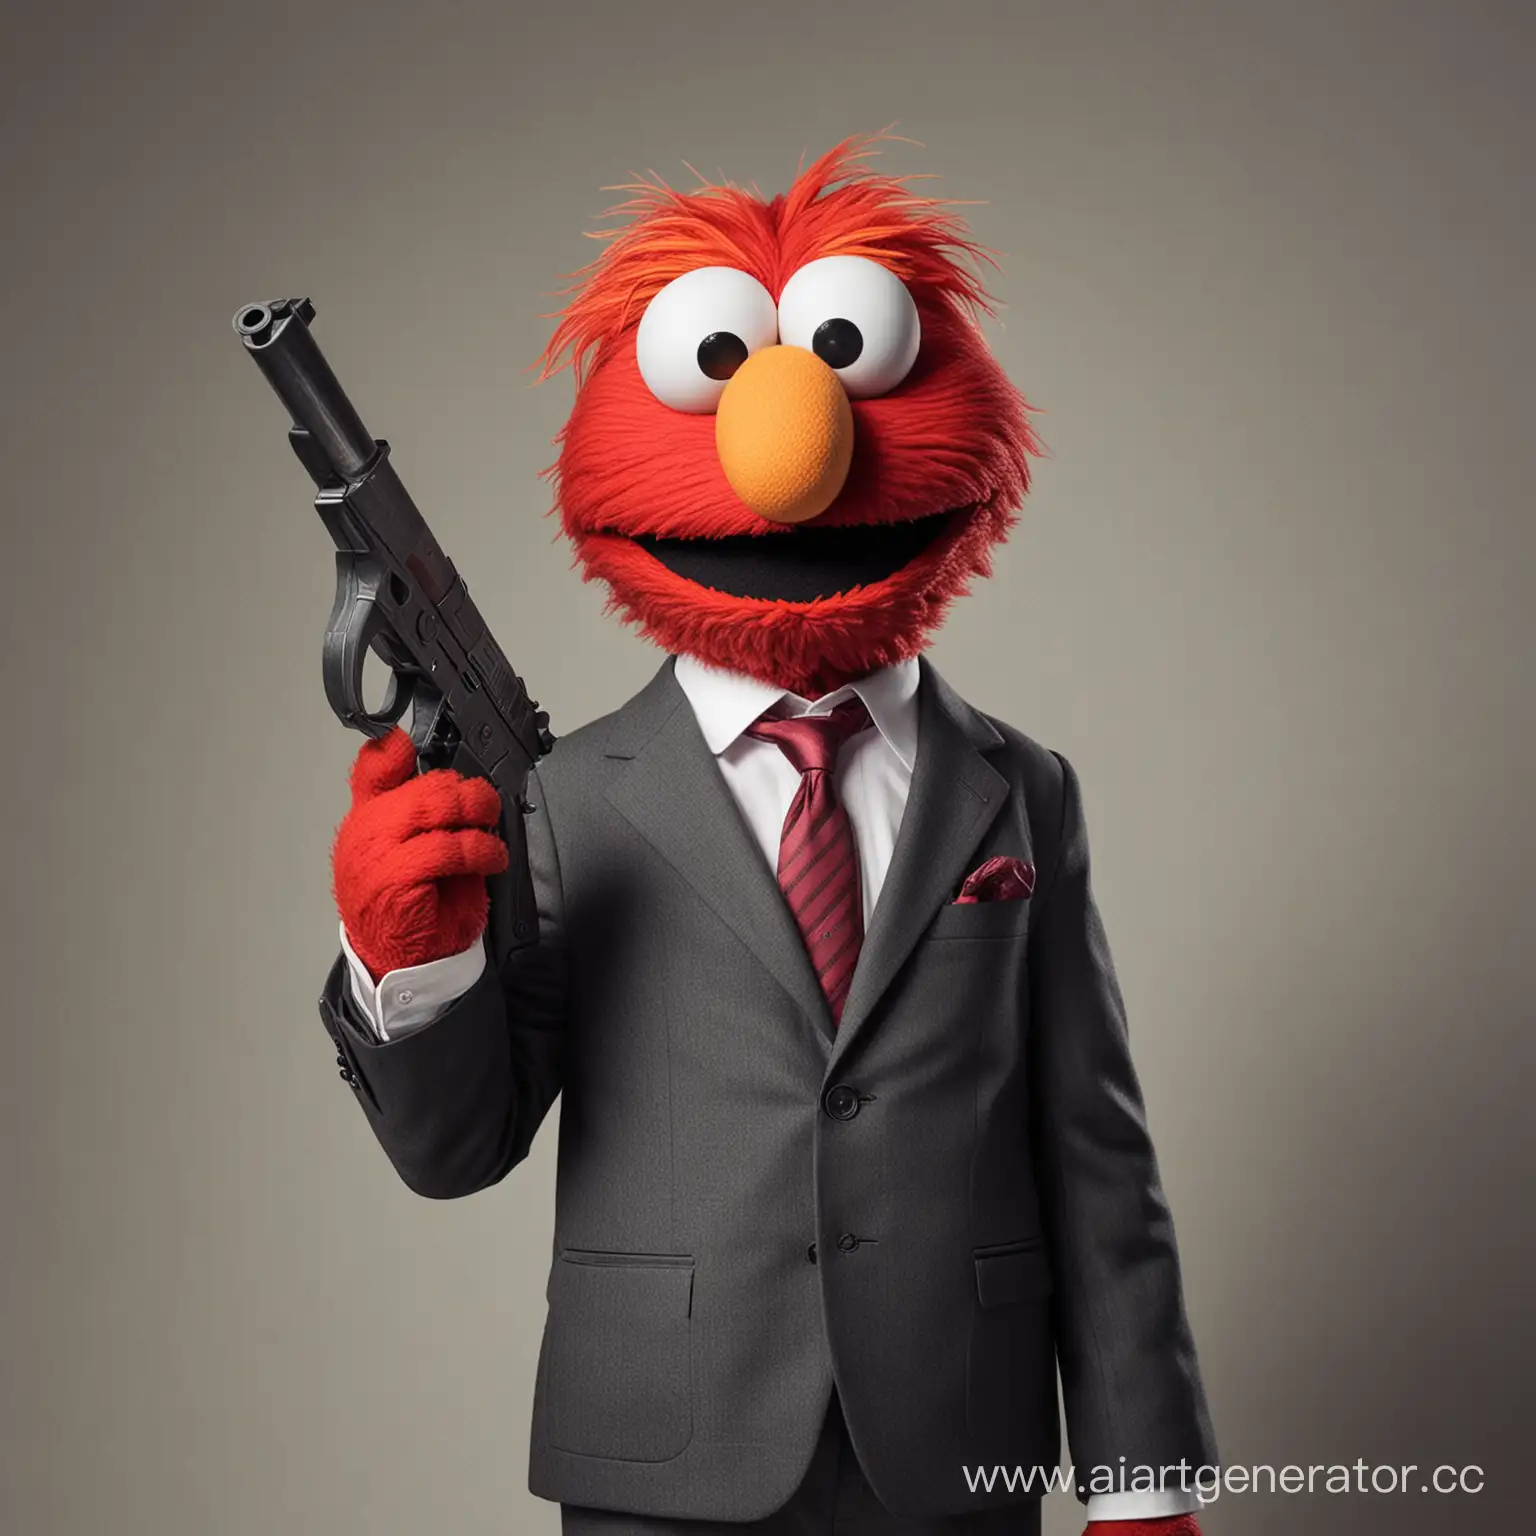 Charismatic-Elmo-in-a-Suit-with-Gun